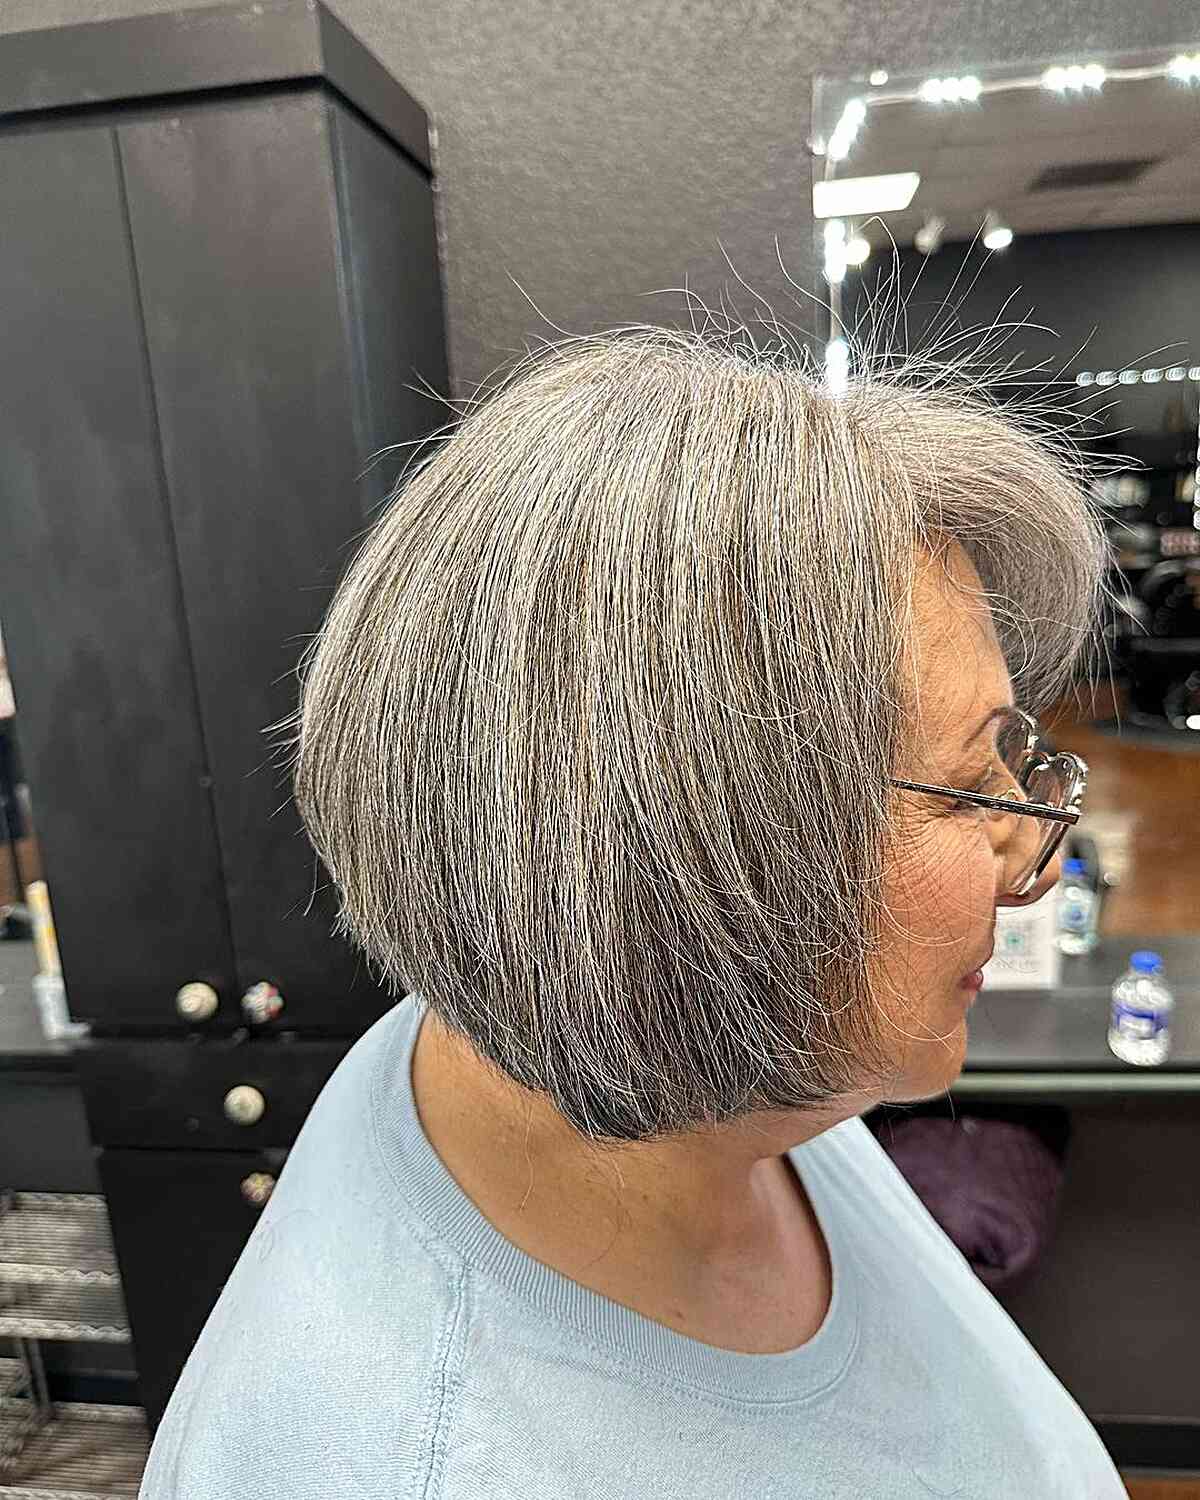 Salt-and-Pepper Short Chin-Length Haircut with Side Fringe on Seniors Aged 60 Wearing Glasses